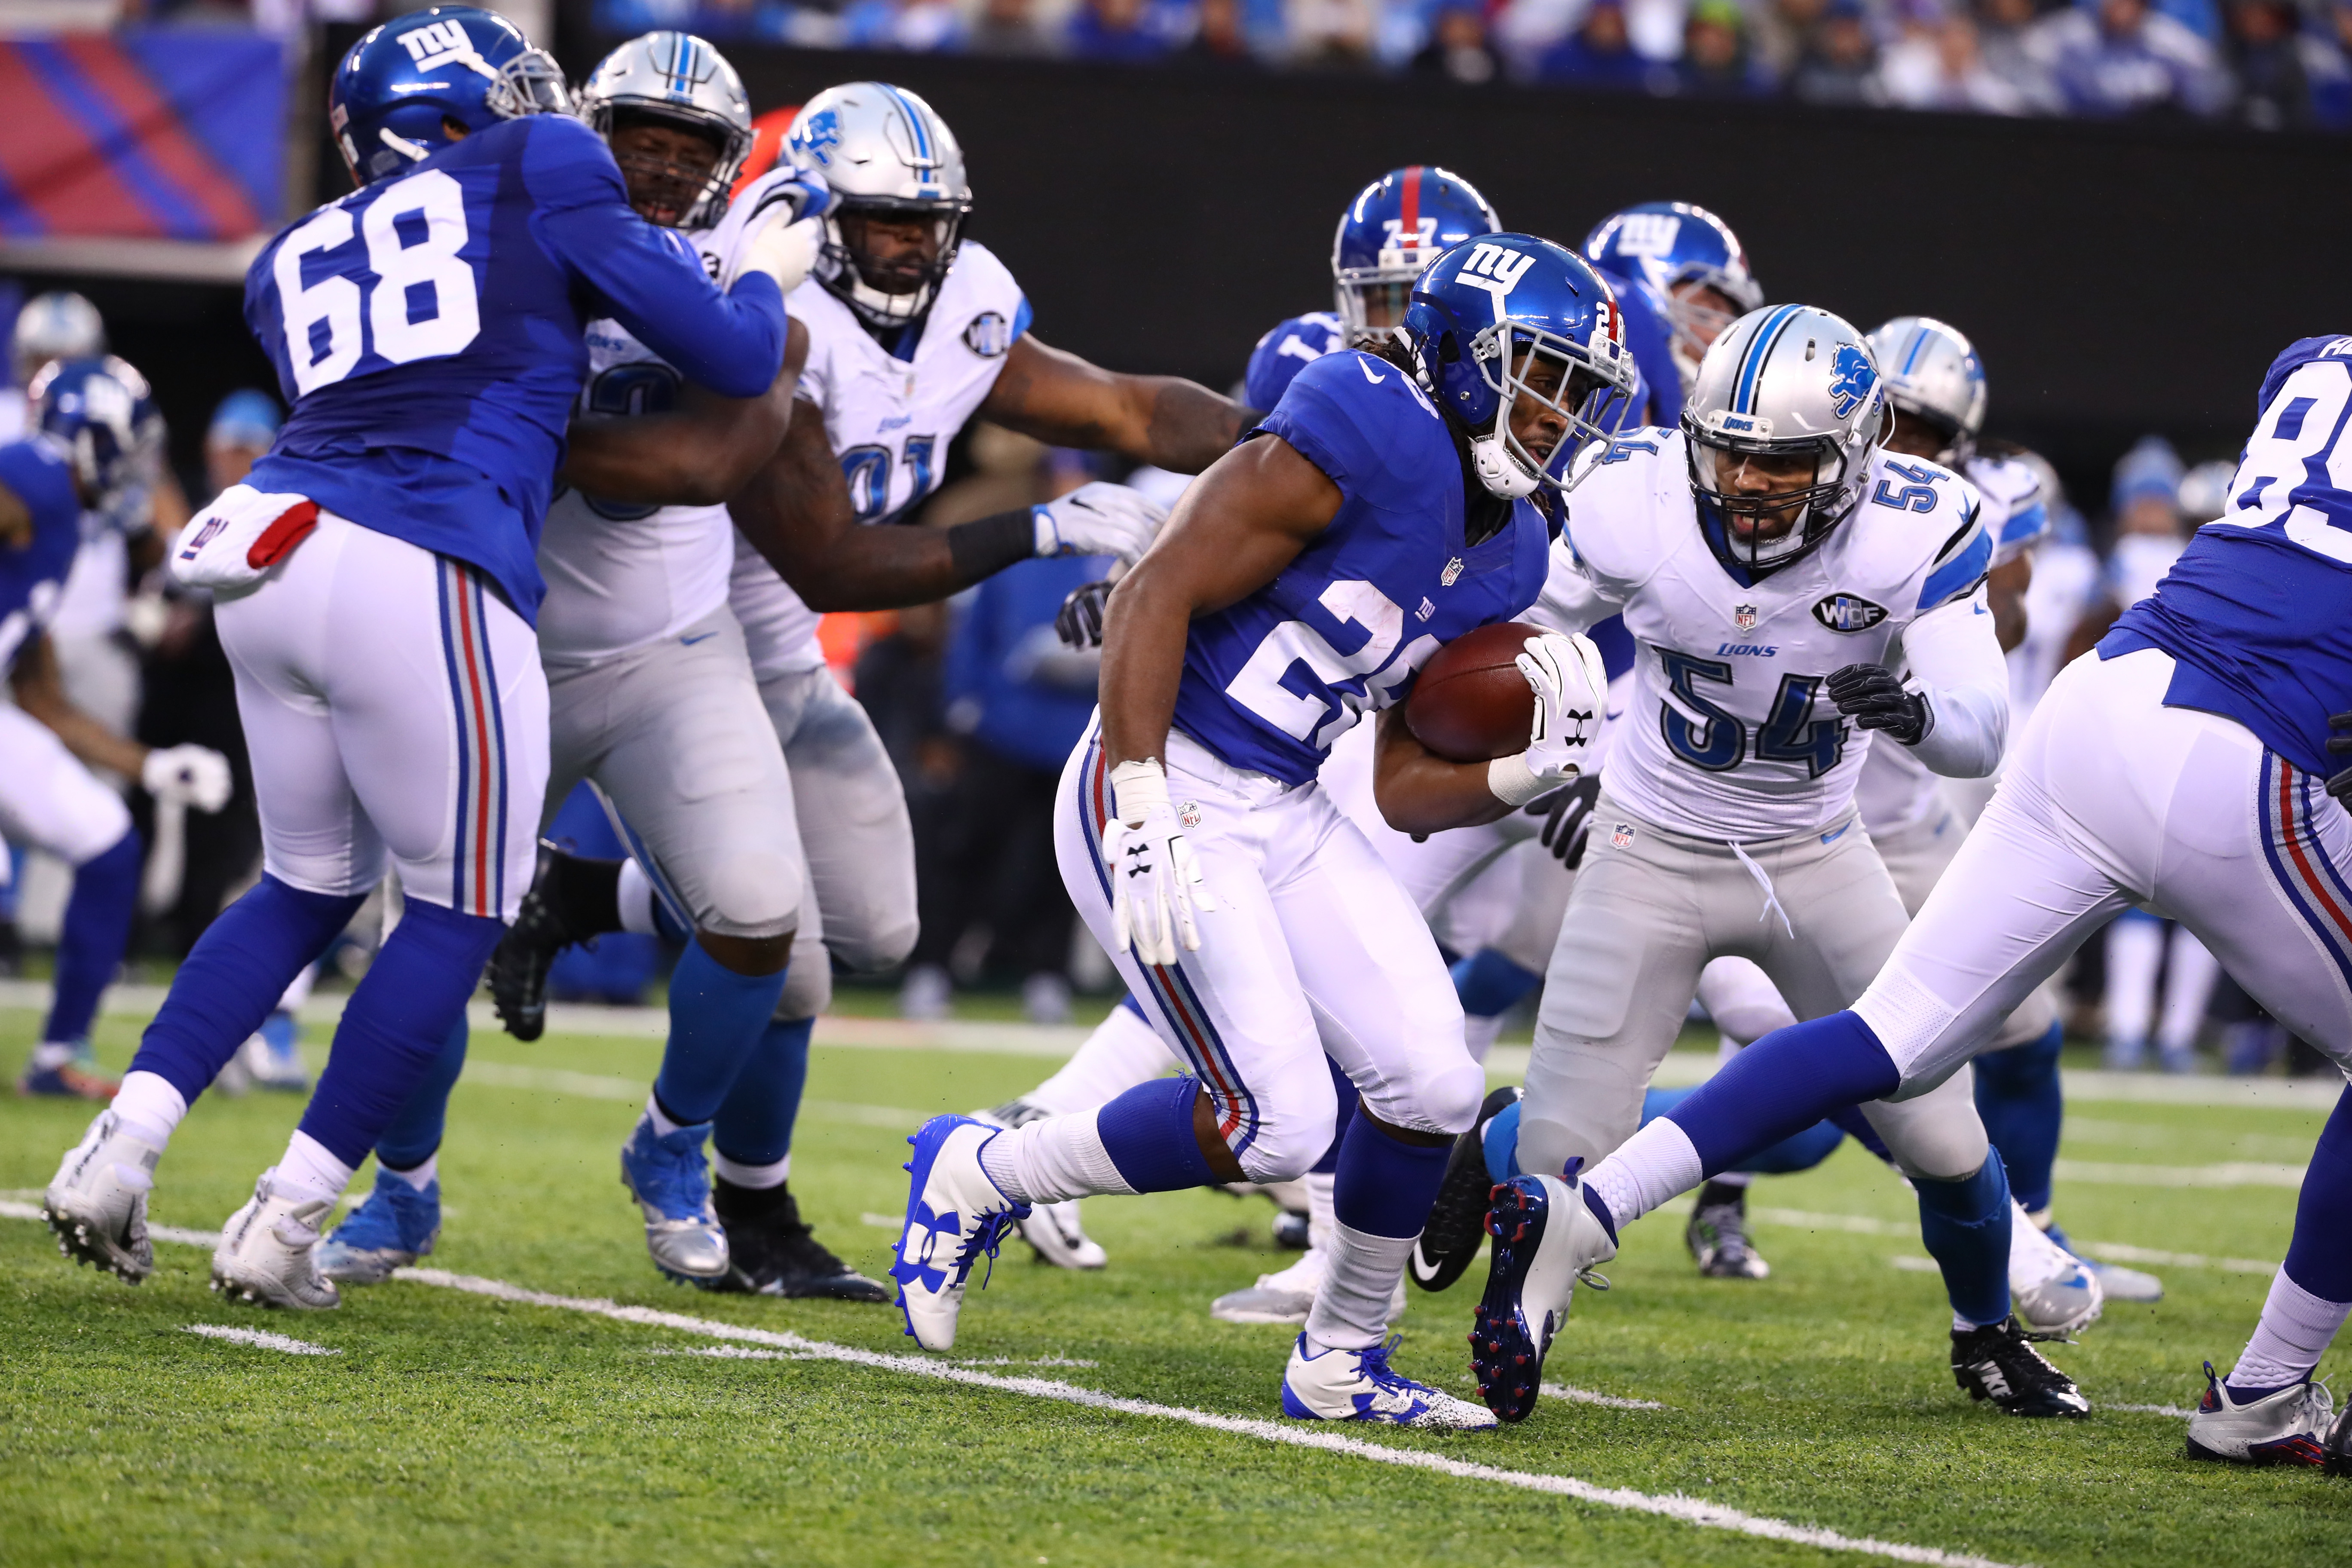 New York Giants vs. Detroit Lions: Where to watch, listen and more